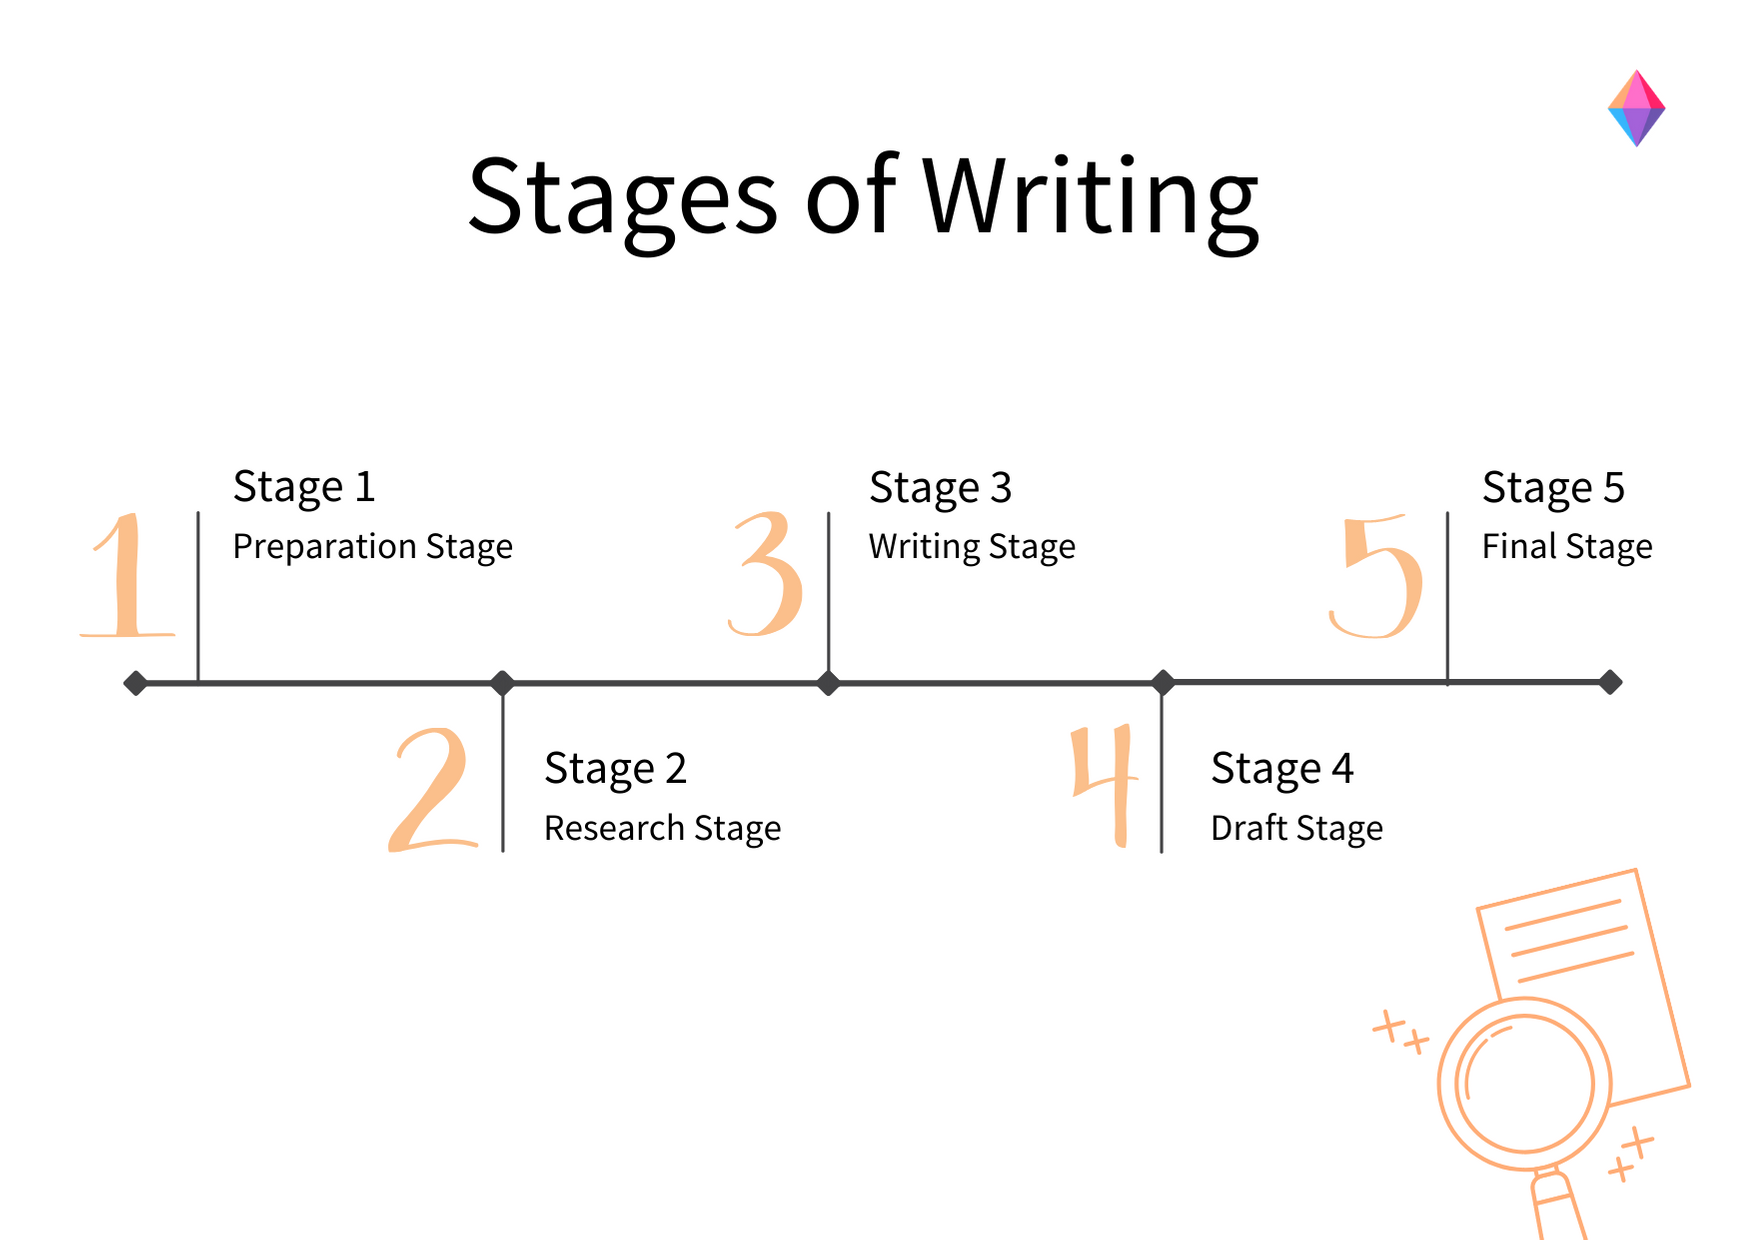 5 Stages of Writing